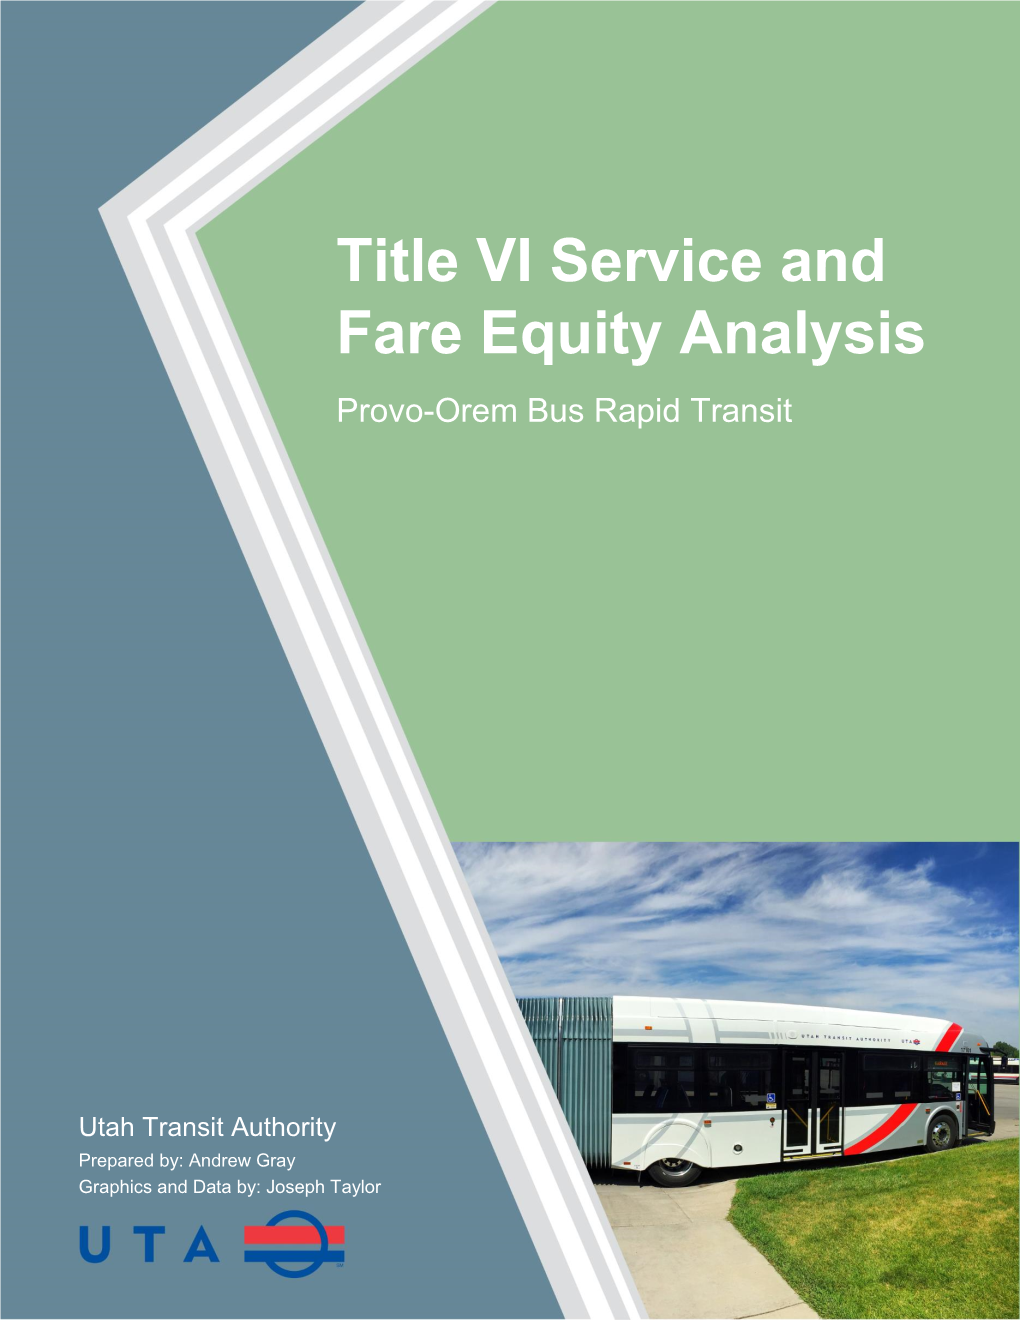 Title VI Service and Fare Equity Analysis